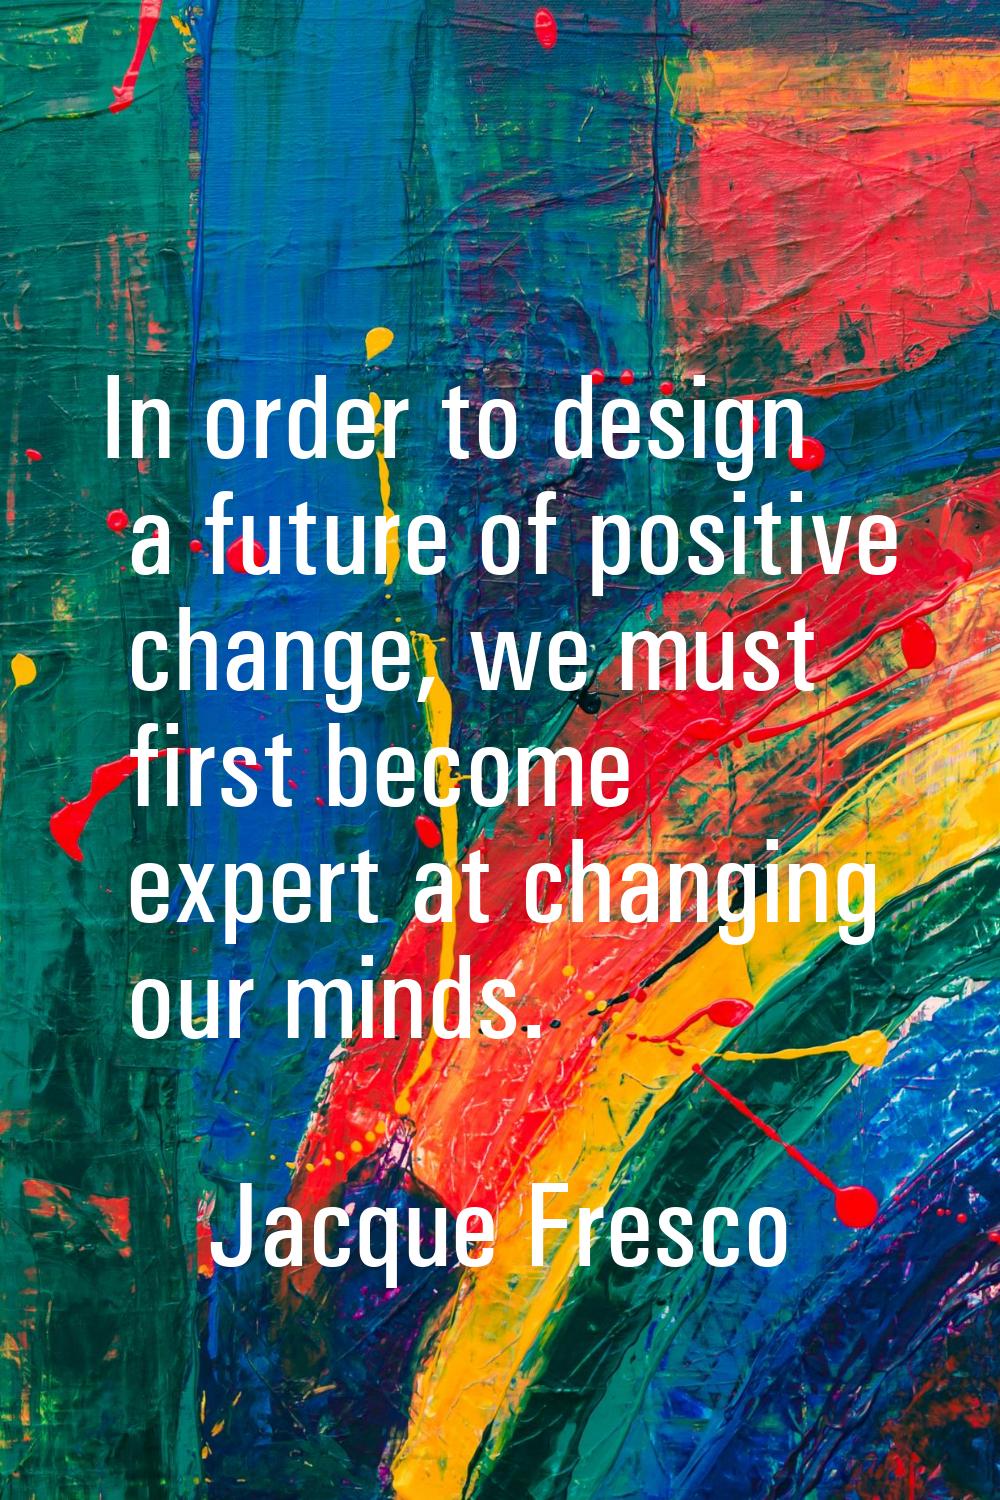 In order to design a future of positive change, we must first become expert at changing our minds.